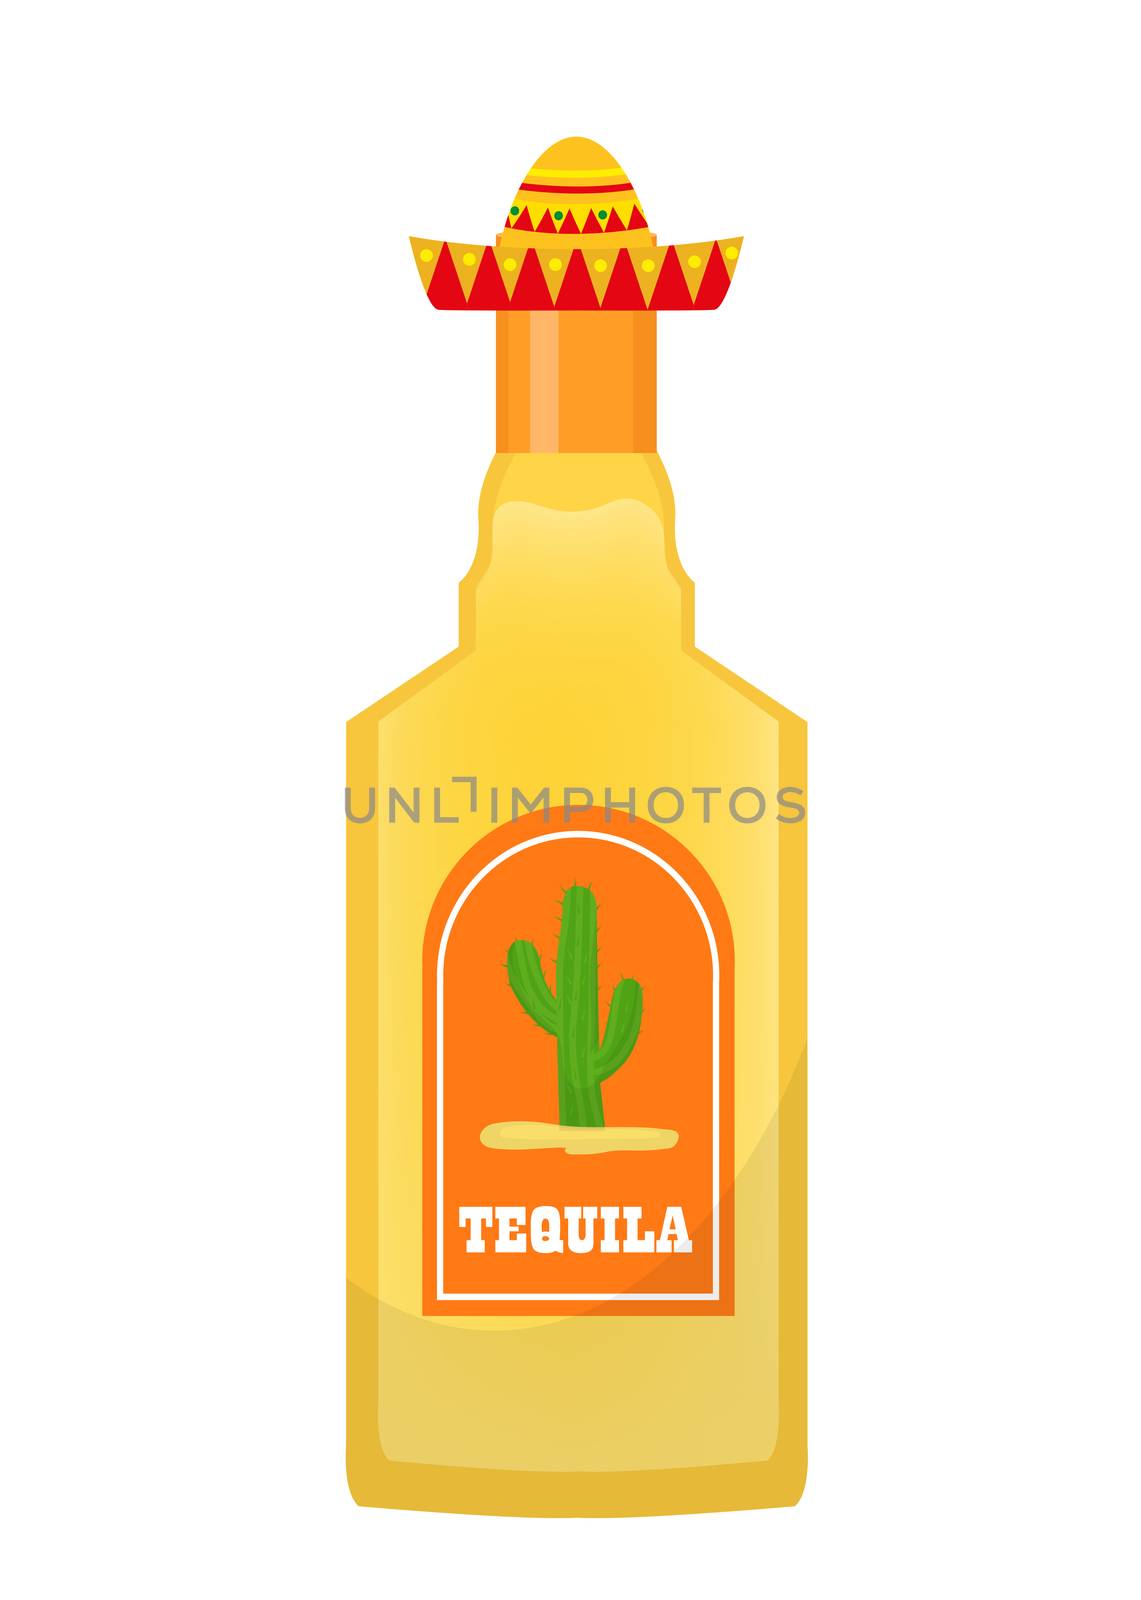 Tequila bottle icon flat, cartoon style isolated on white background. illustration, clip art. Traditional Mexican drink